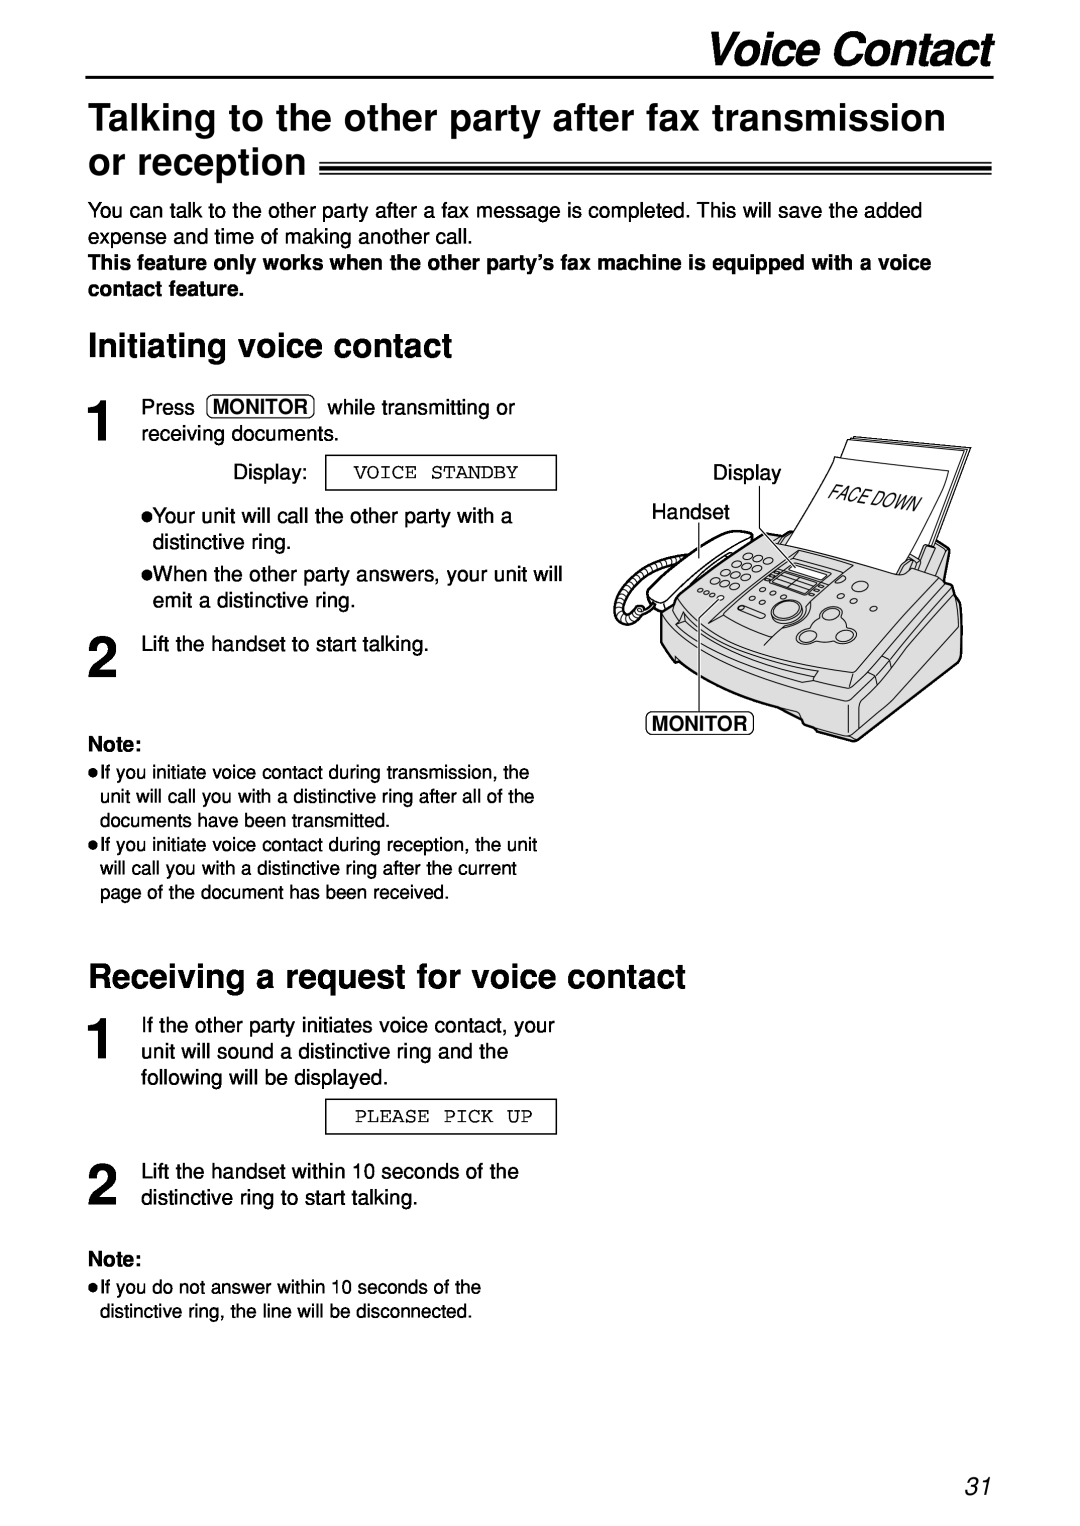 Panasonic KX-FL501C manual Voice Contact, Talking to the other party after fax transmission or reception 